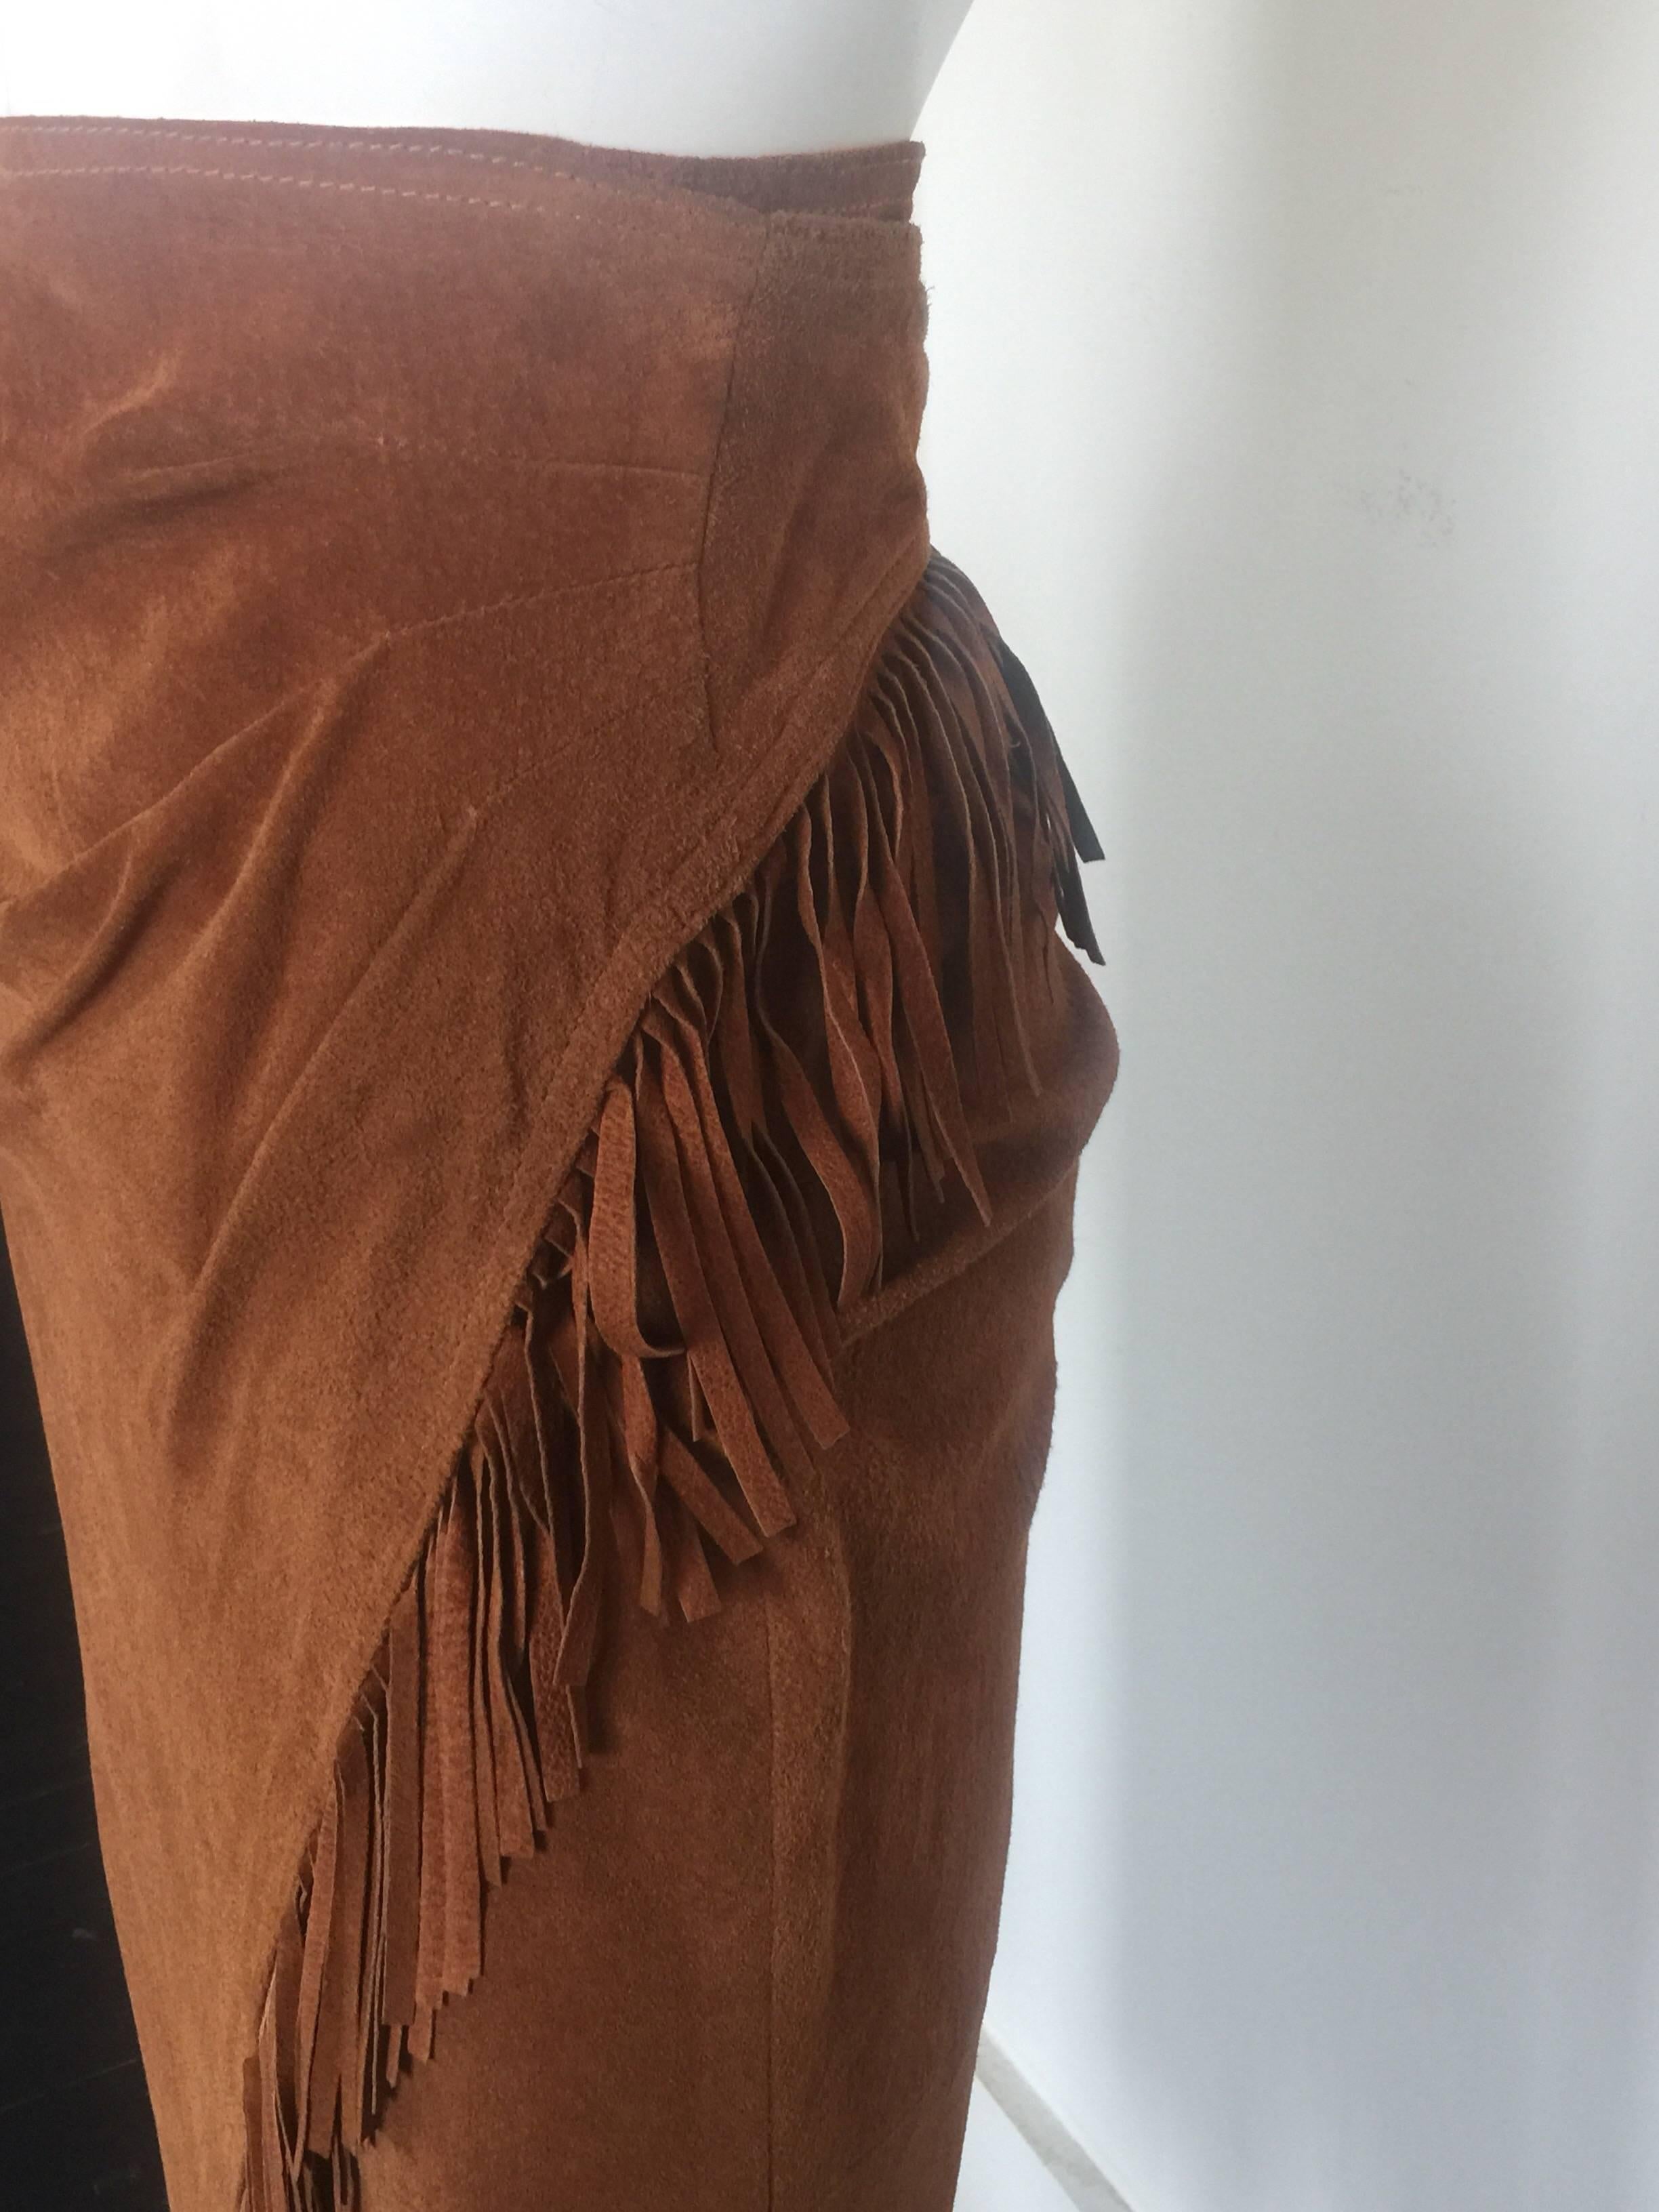 This 100% leather suede fringe skirt is a size M but because of wrap style can fit multiple sizes. 